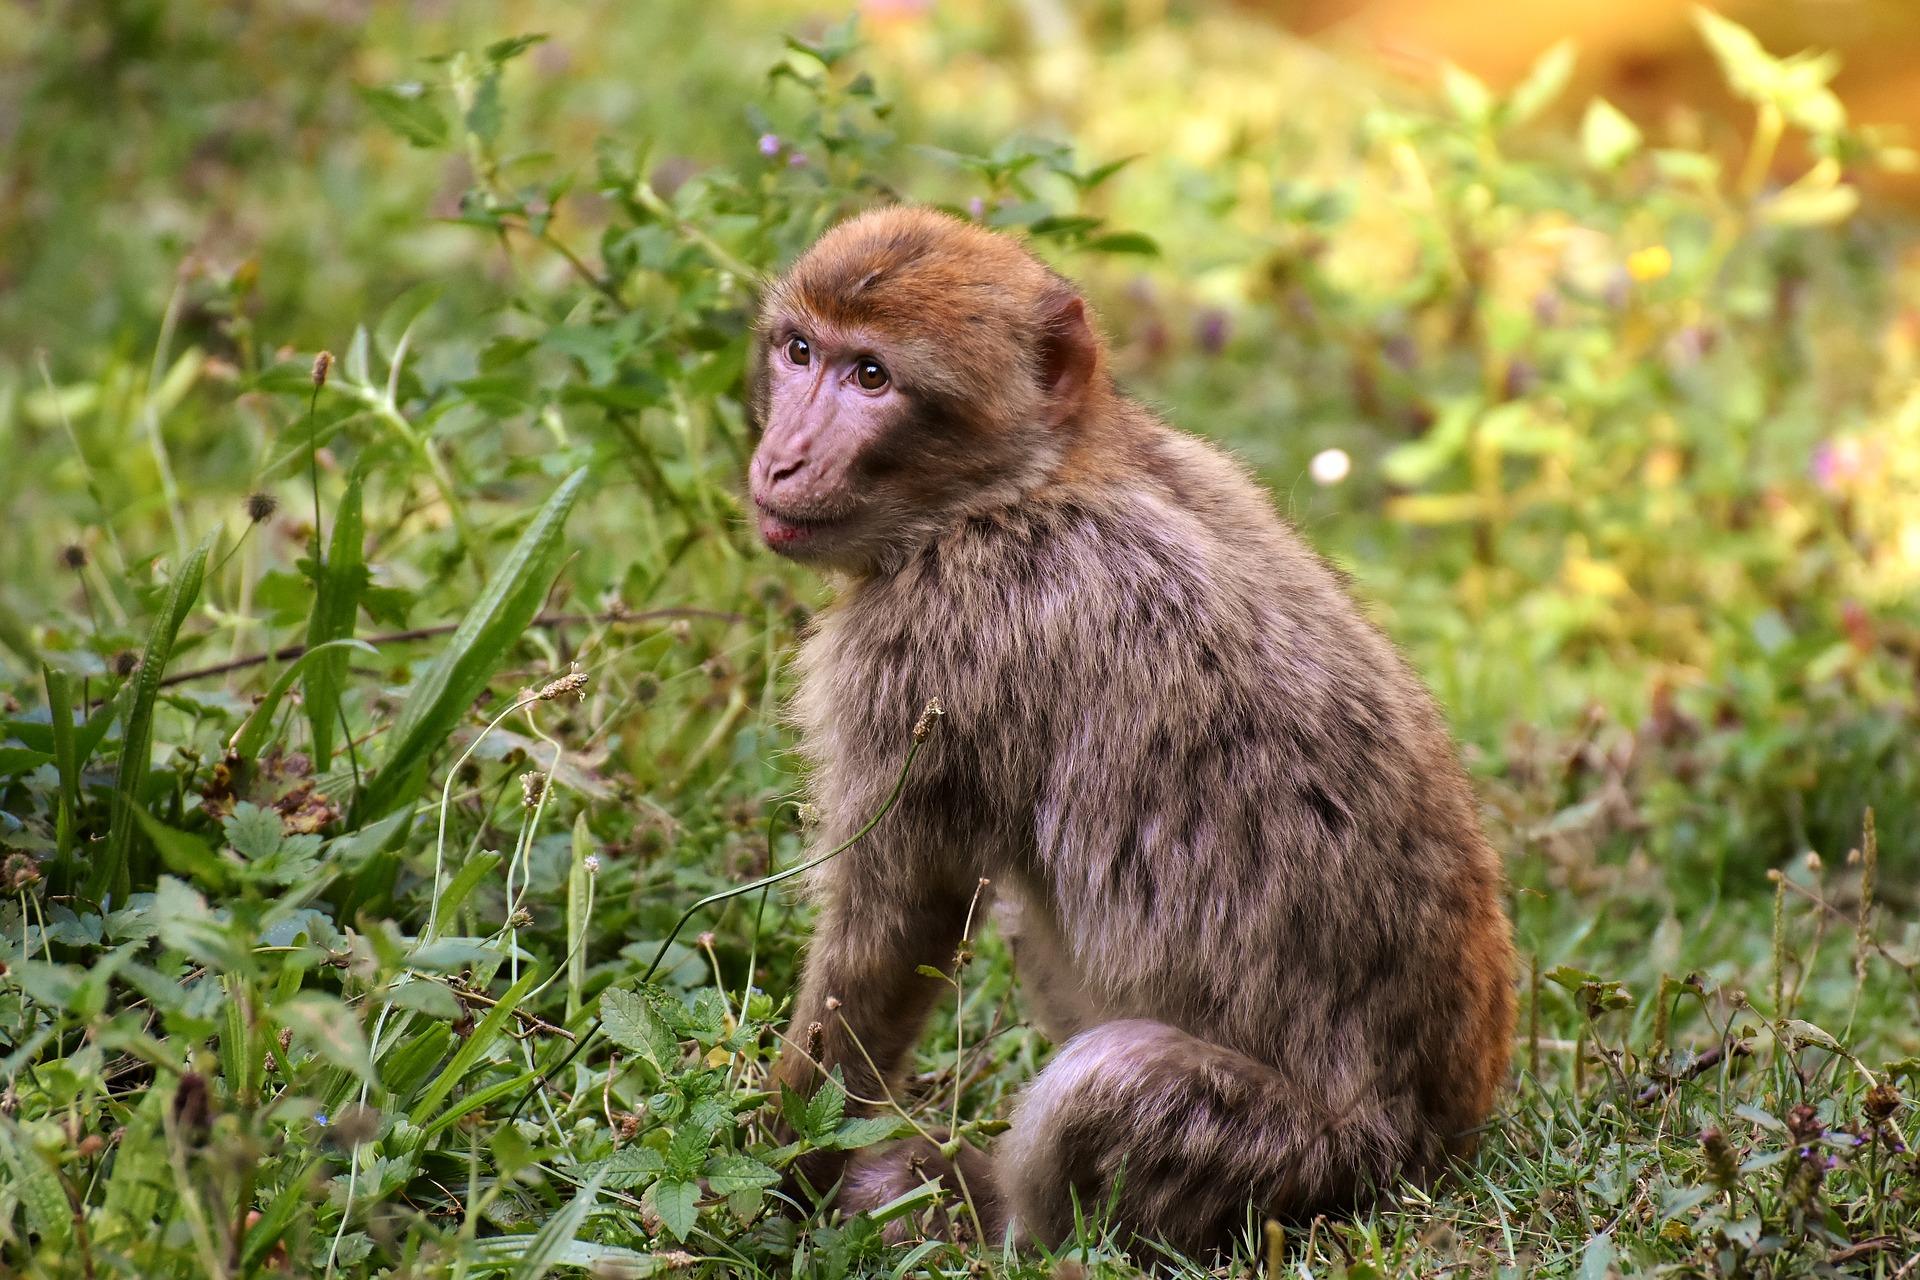 Barbary macaque endangered